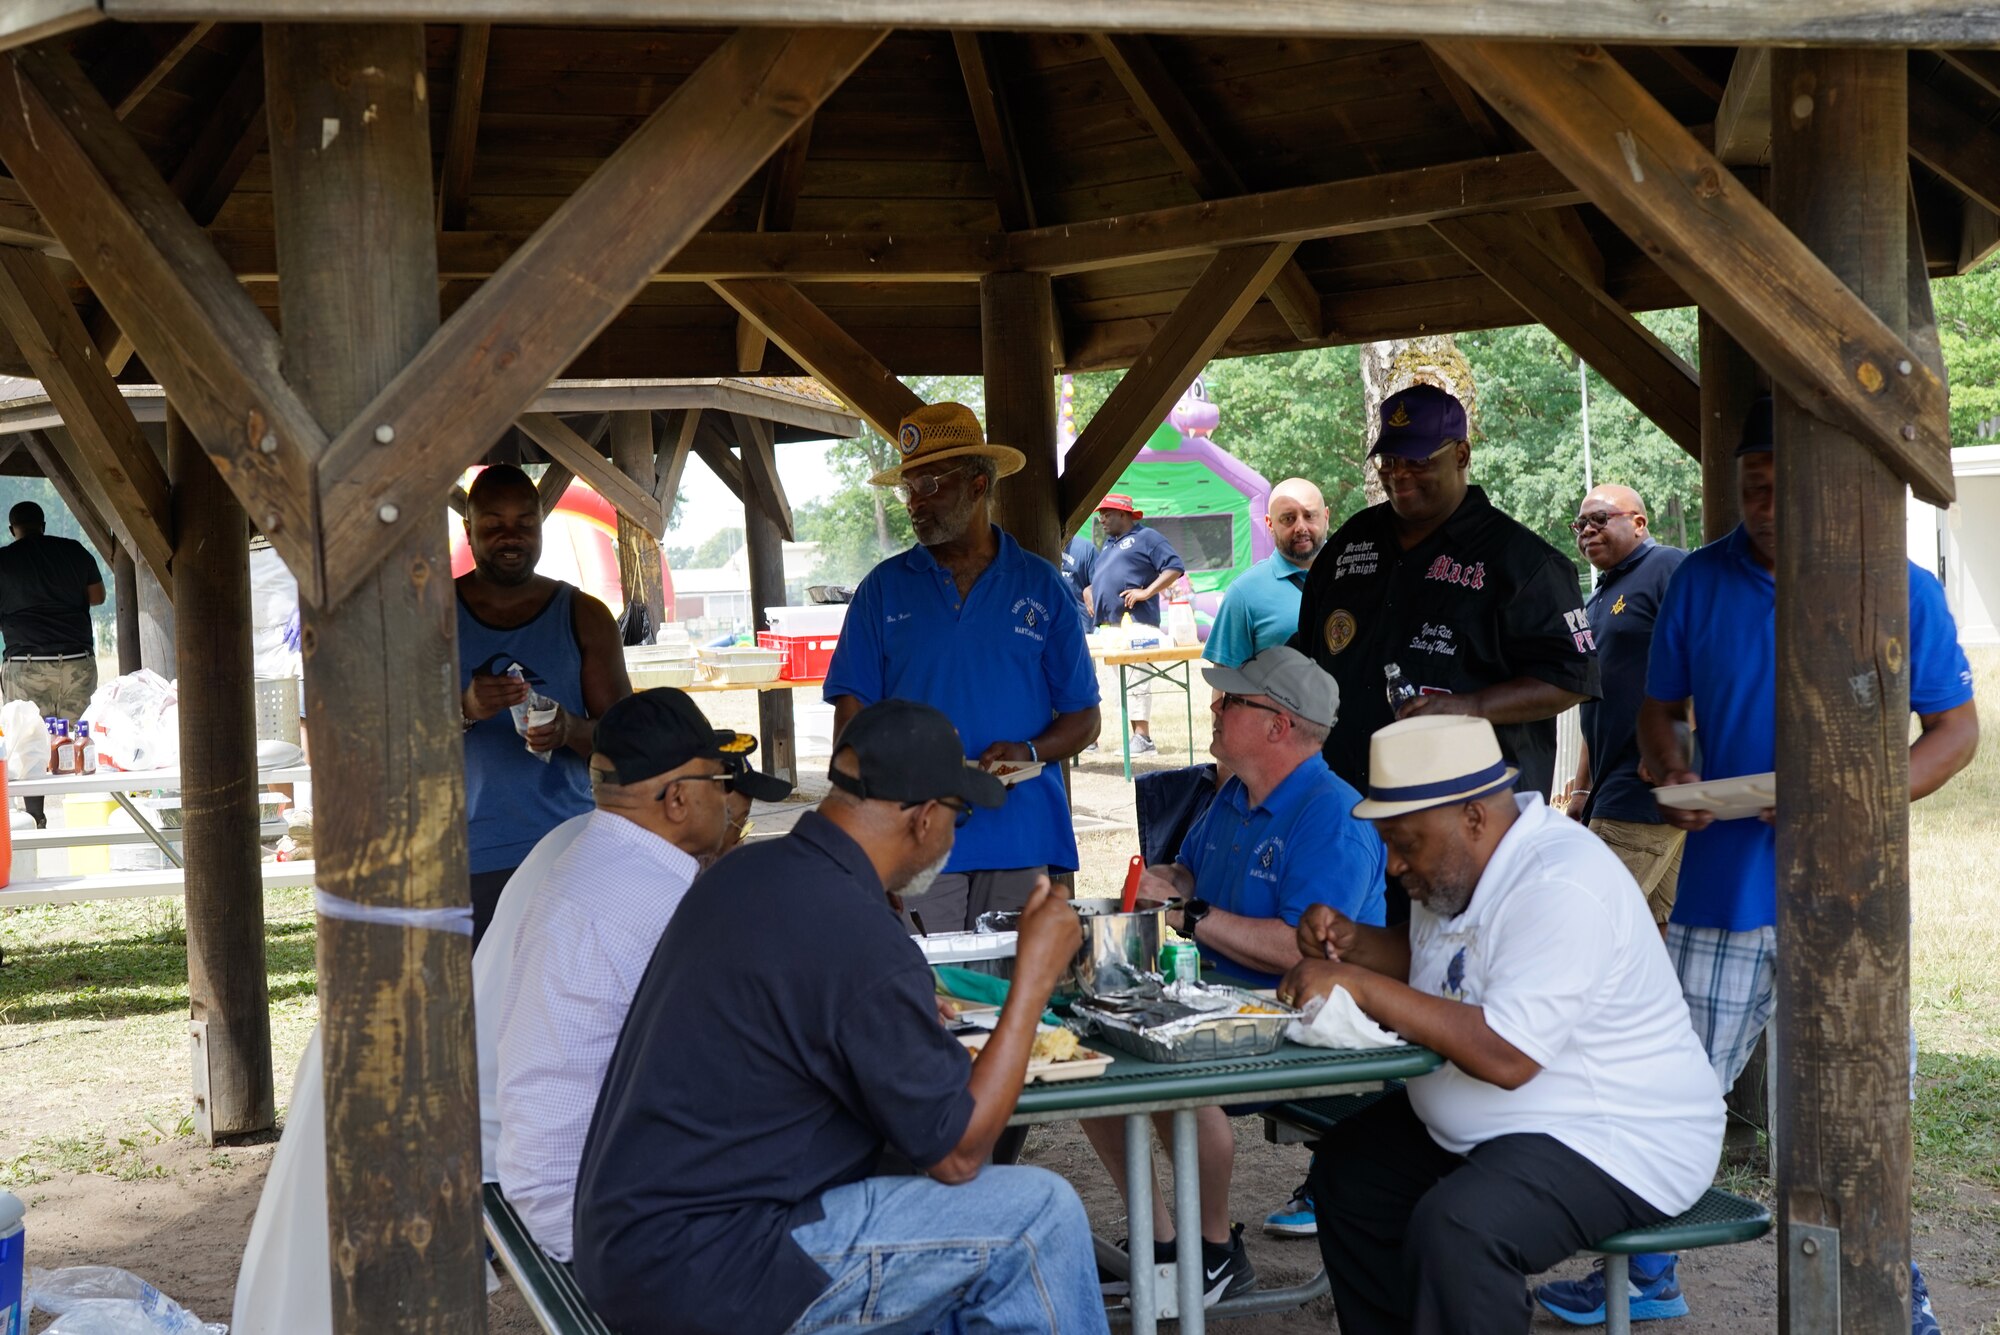 Kaiserslautern Military Community’s second annual Juneteenth Celebration attendees gather under a picnic pagoda at Pulaski Barracks, Germany, June 18, 2022. The attendees shared stories, laughter, and inspirational thoughts with one another. (U.S. Air Force photo by Airman 1st Class Lauren Jacoby)